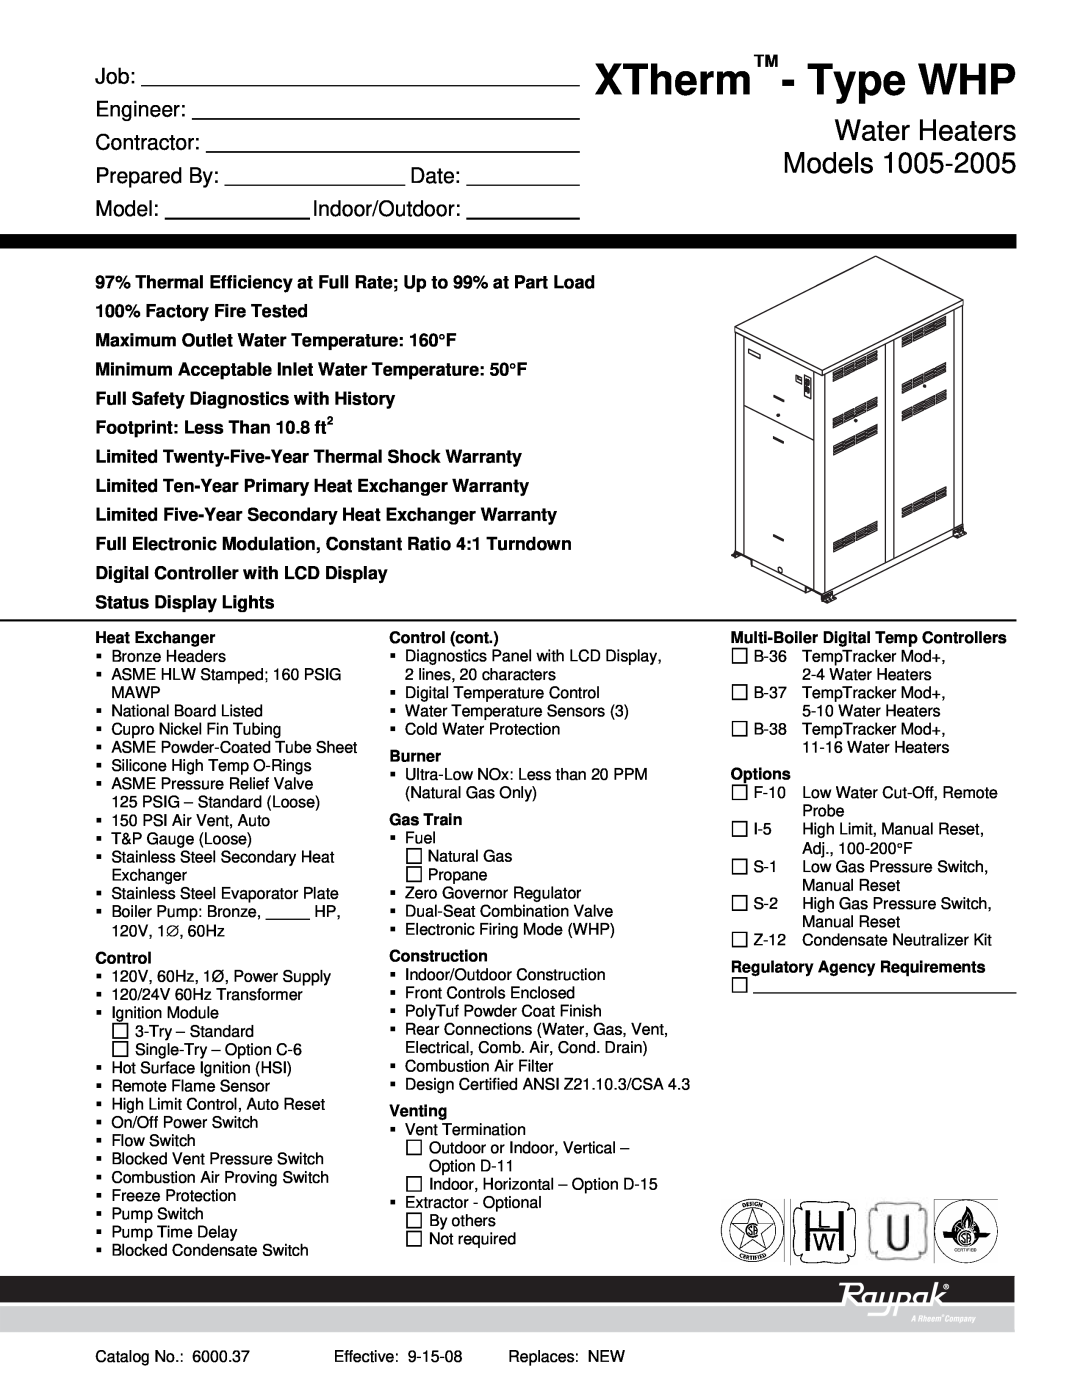 Raypak 1005-2005 warranty XTherm- Type WHP, Water Heaters Models, Job Engineer Contractor, Prepared By, Date 